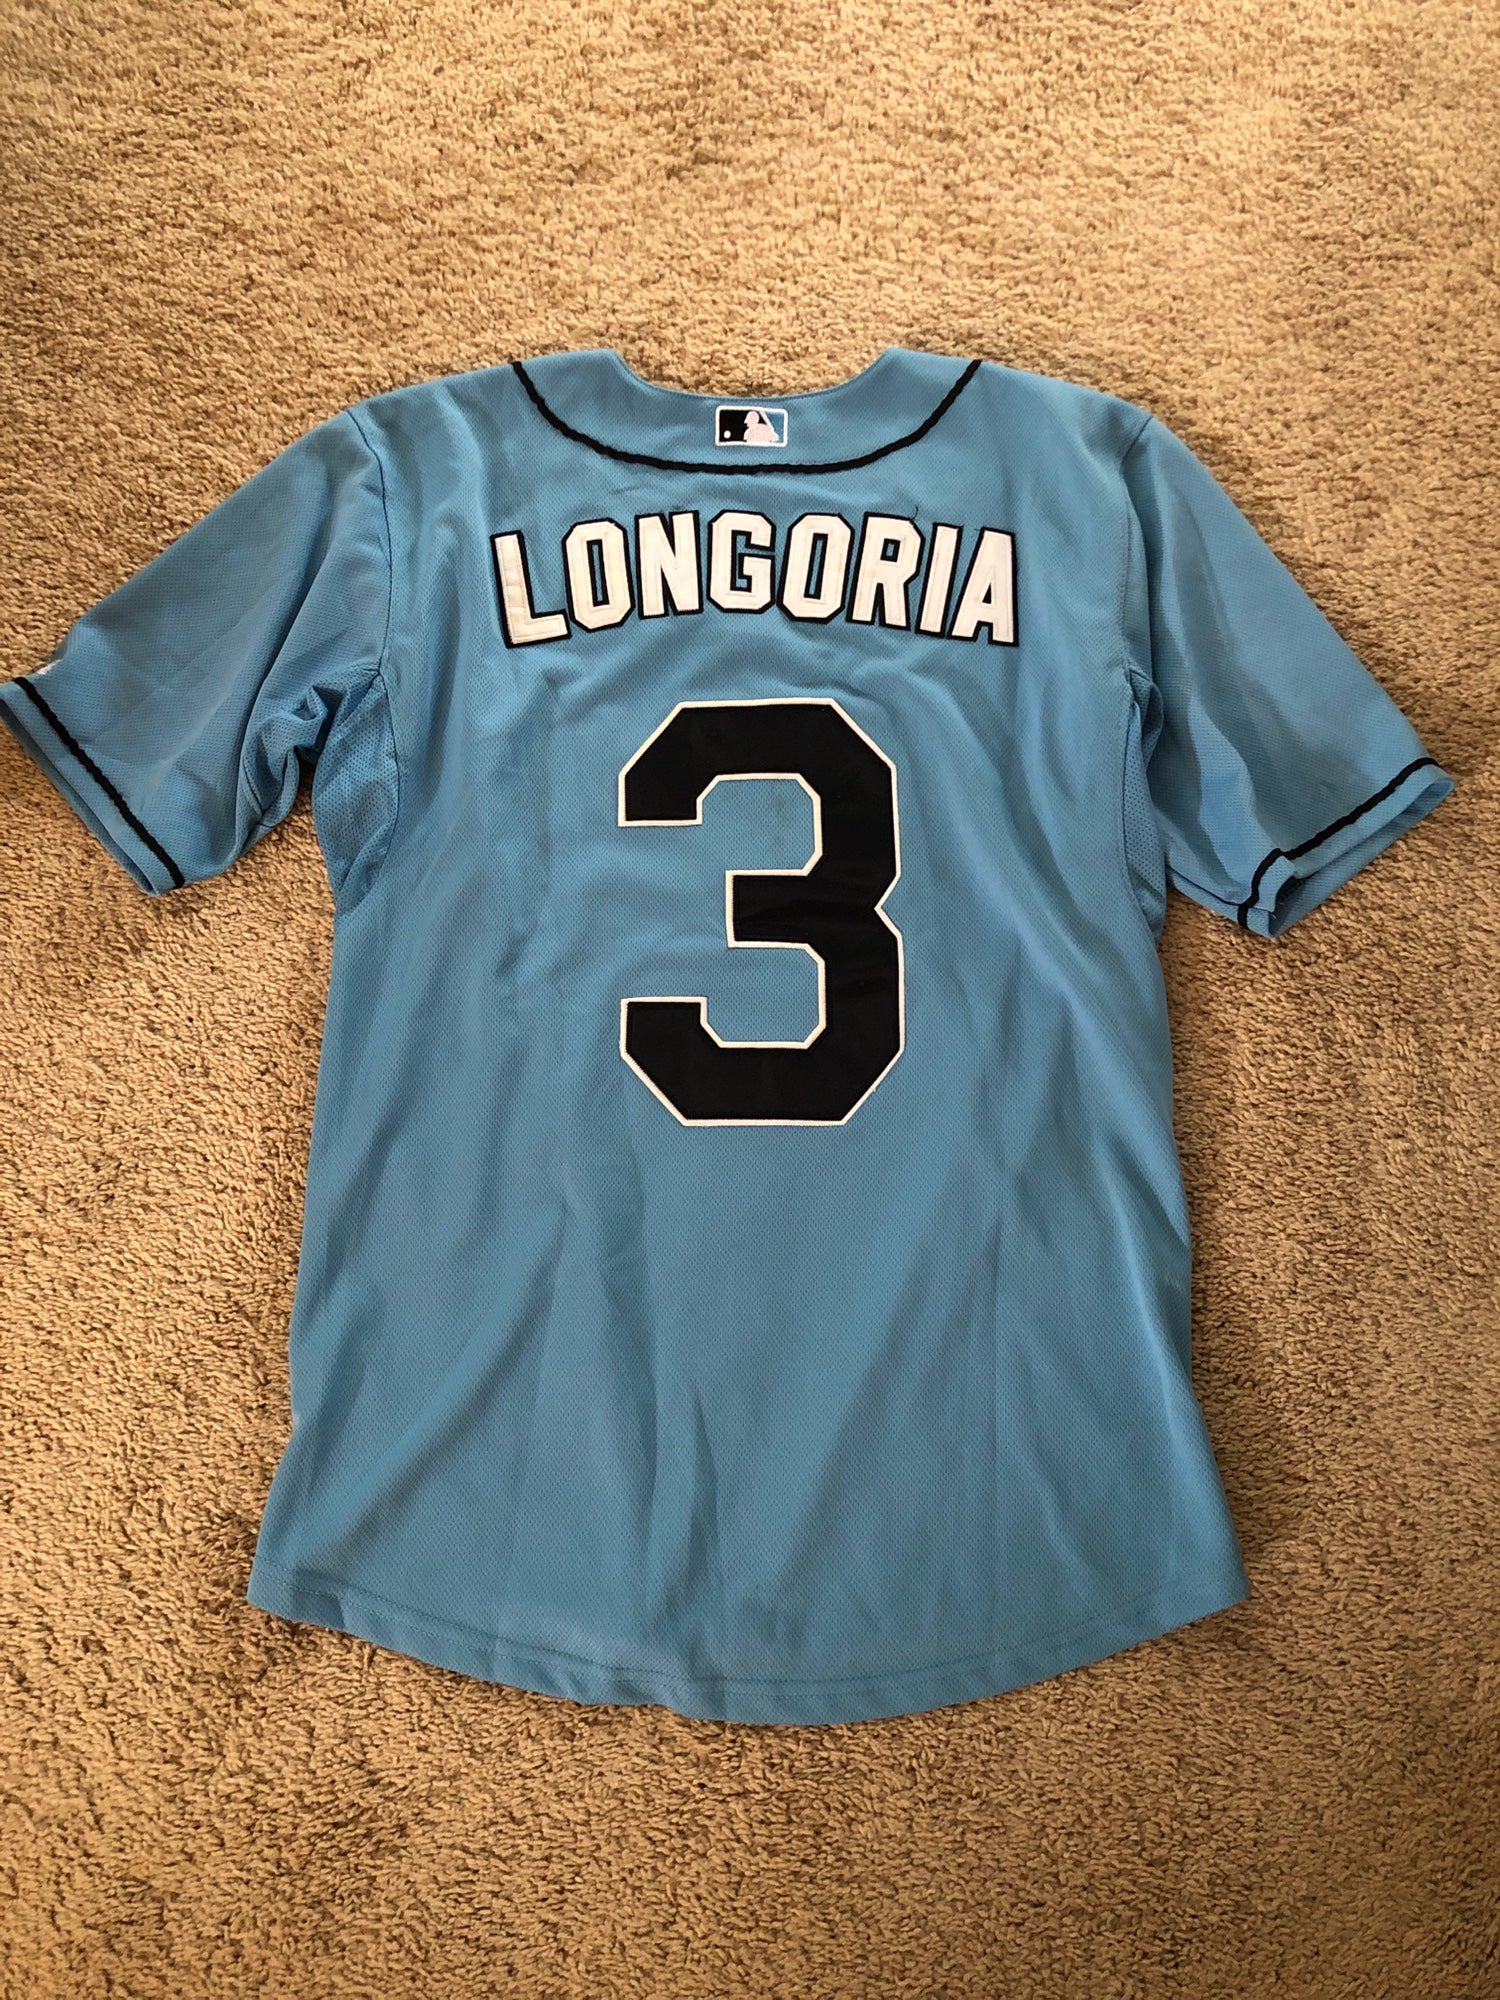 Retro Tampa Bay Rays Evan Longoria Stitched Coolbase Majestic Jersey Men 54  for Sale in Chula Vista, CA - OfferUp